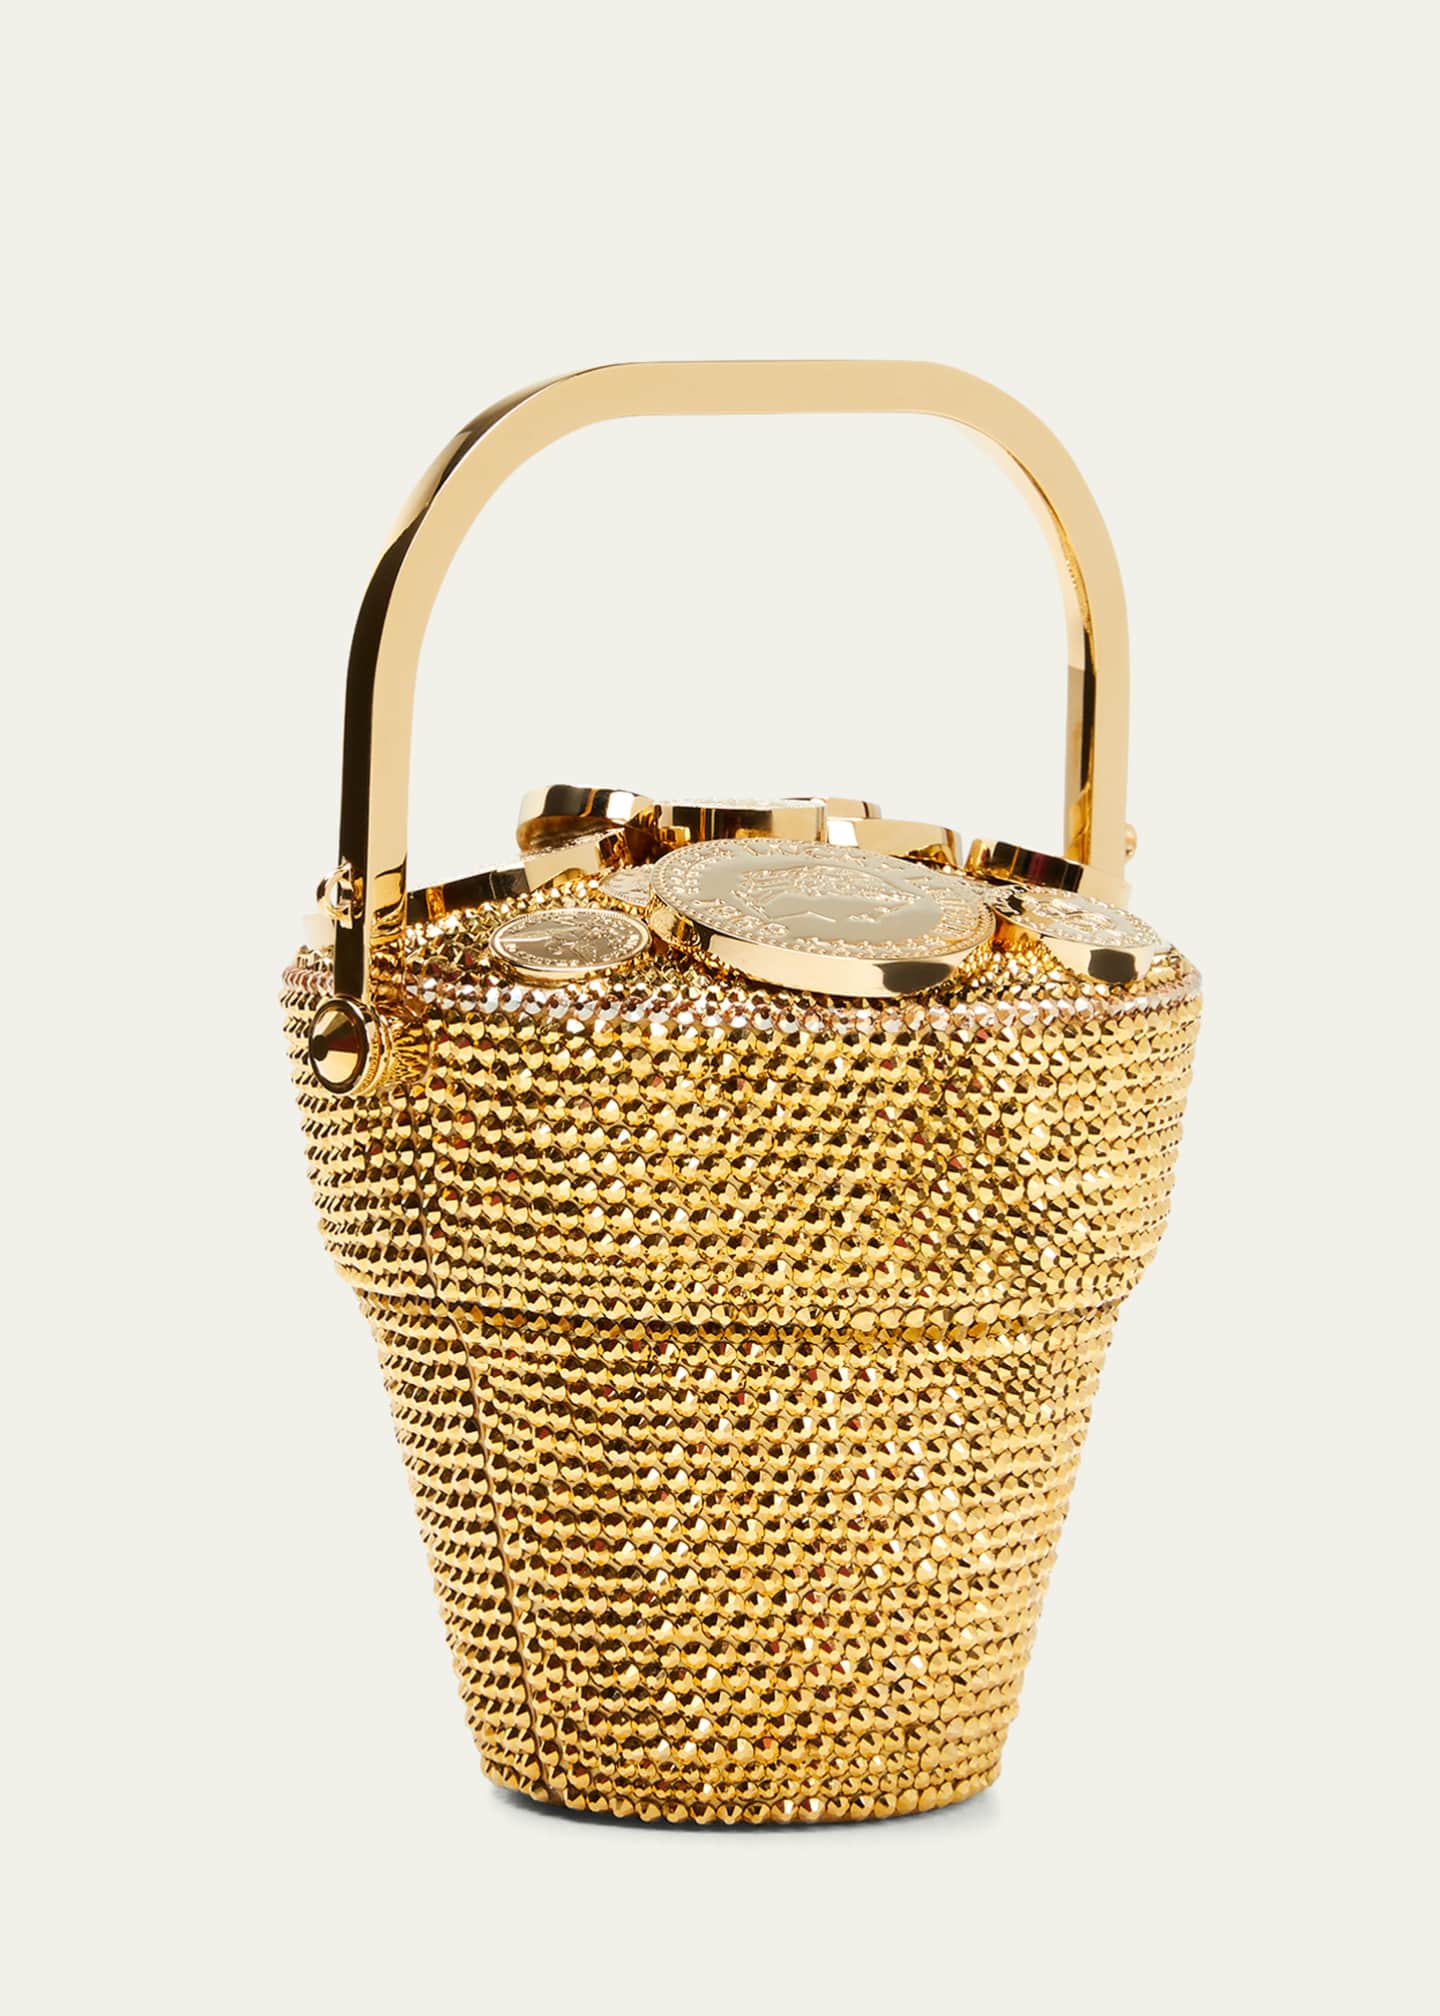 Judith Leiber Couture Khloé's Pot of Gold Crystal Minaudière